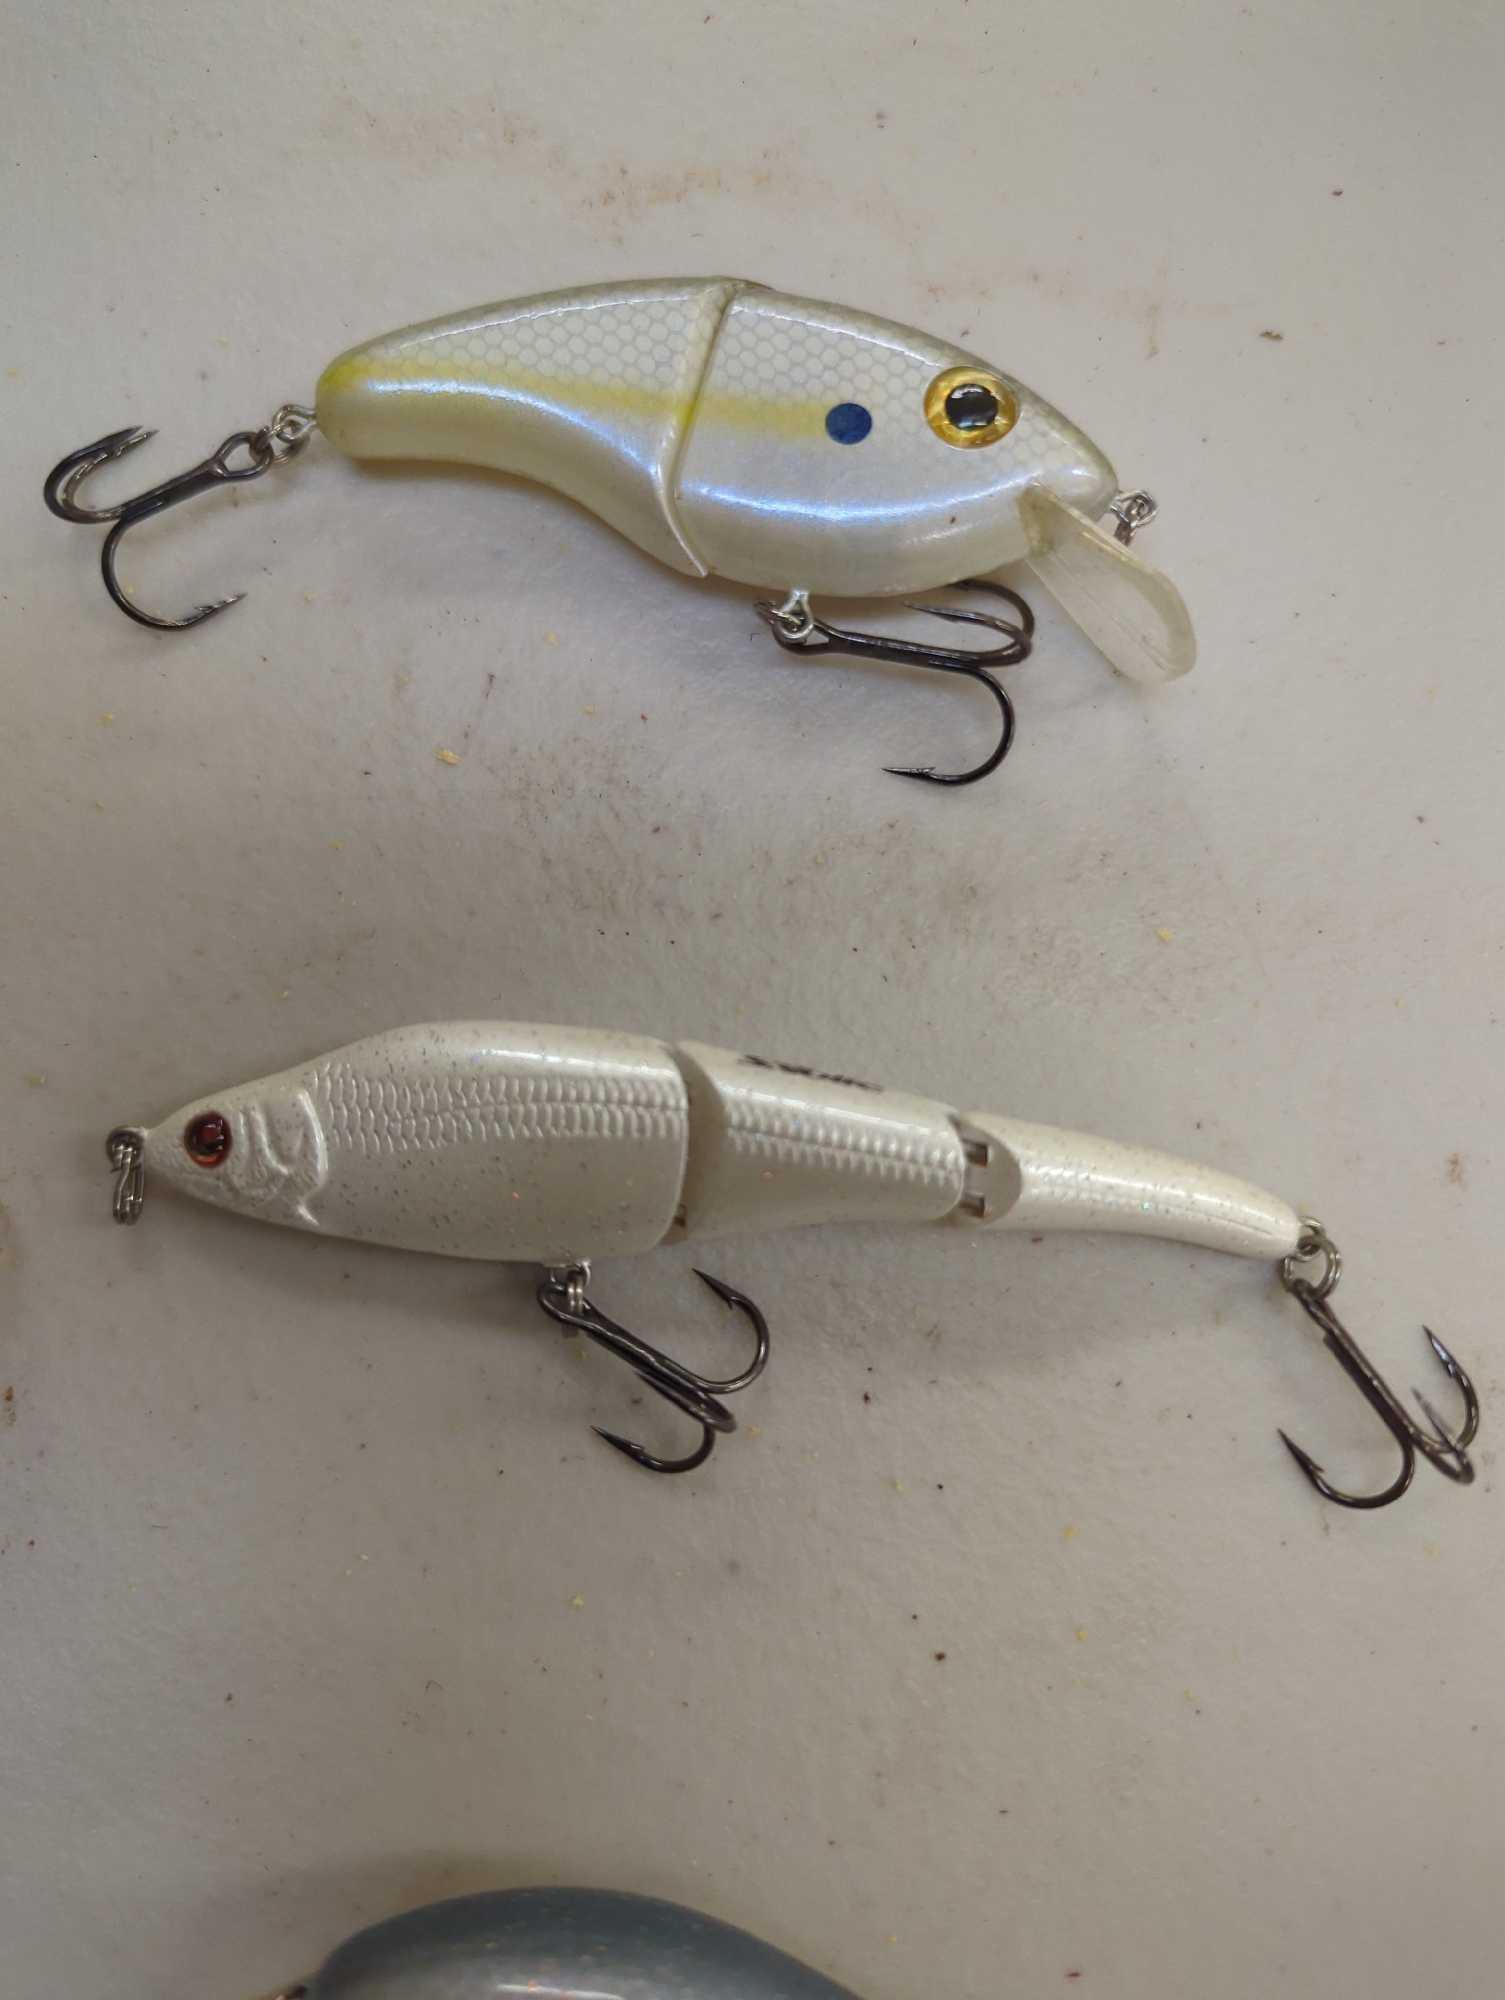 Clear chocolate box of fishing lures of similar style. Comes as is shown in photos. Appears to be